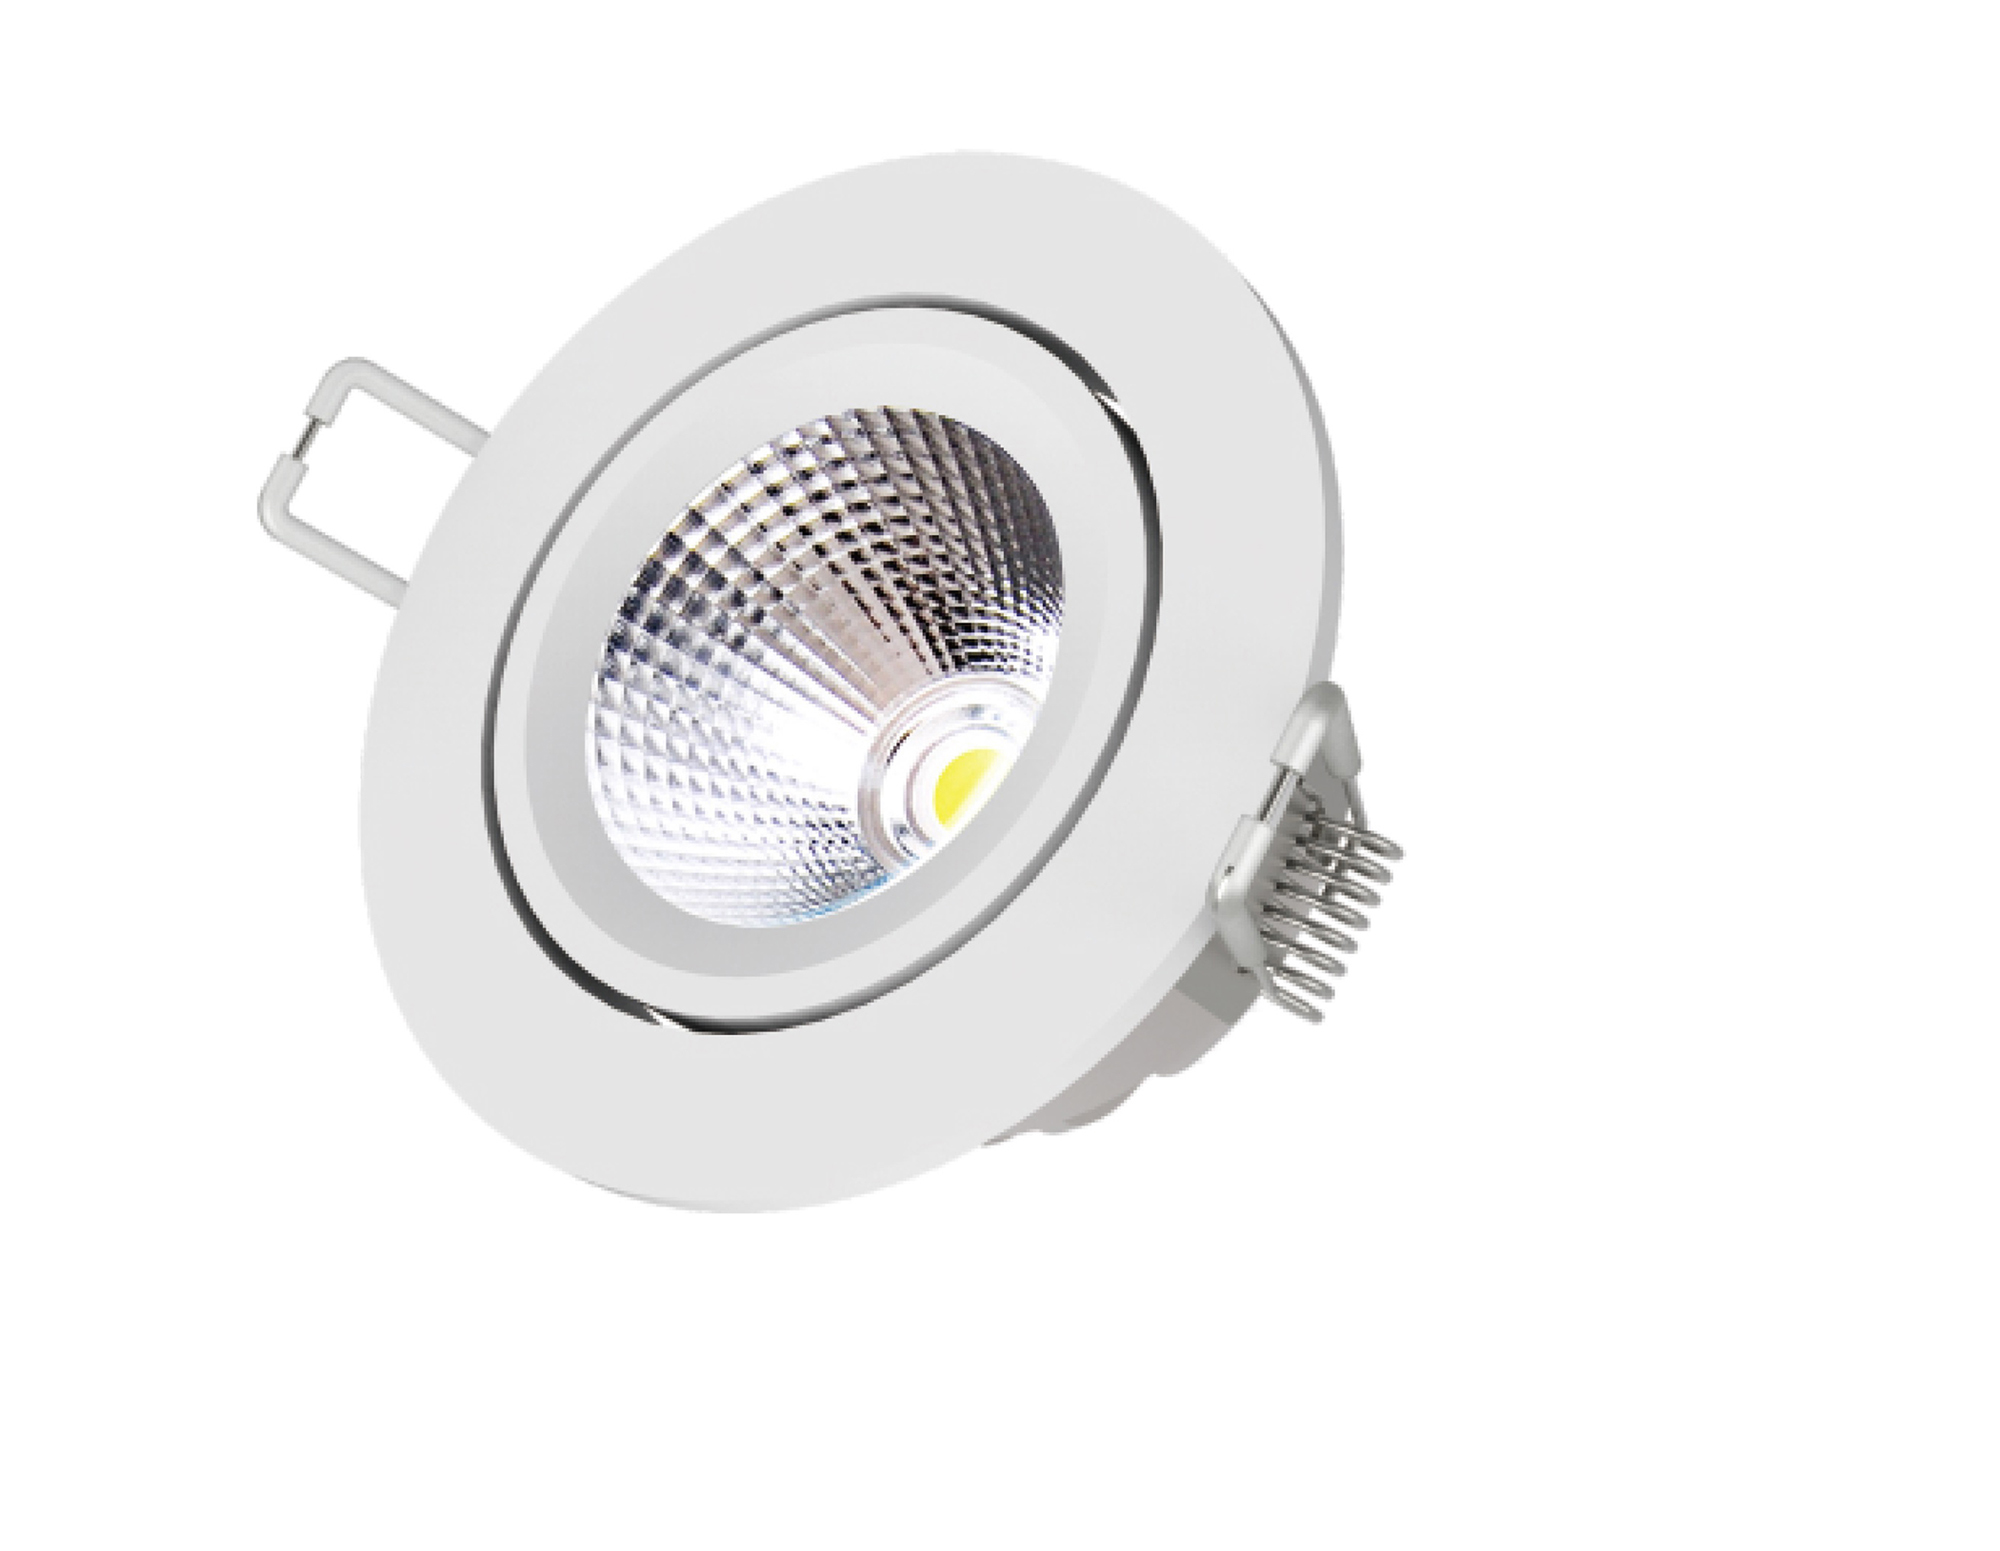 SD-12R-Y  Smart Spot light, RF 2.4GHz, 12W, Dimmable, 3000K, 24 degree beam angle, 200-240Vac, F95mm cut-out, IP20.